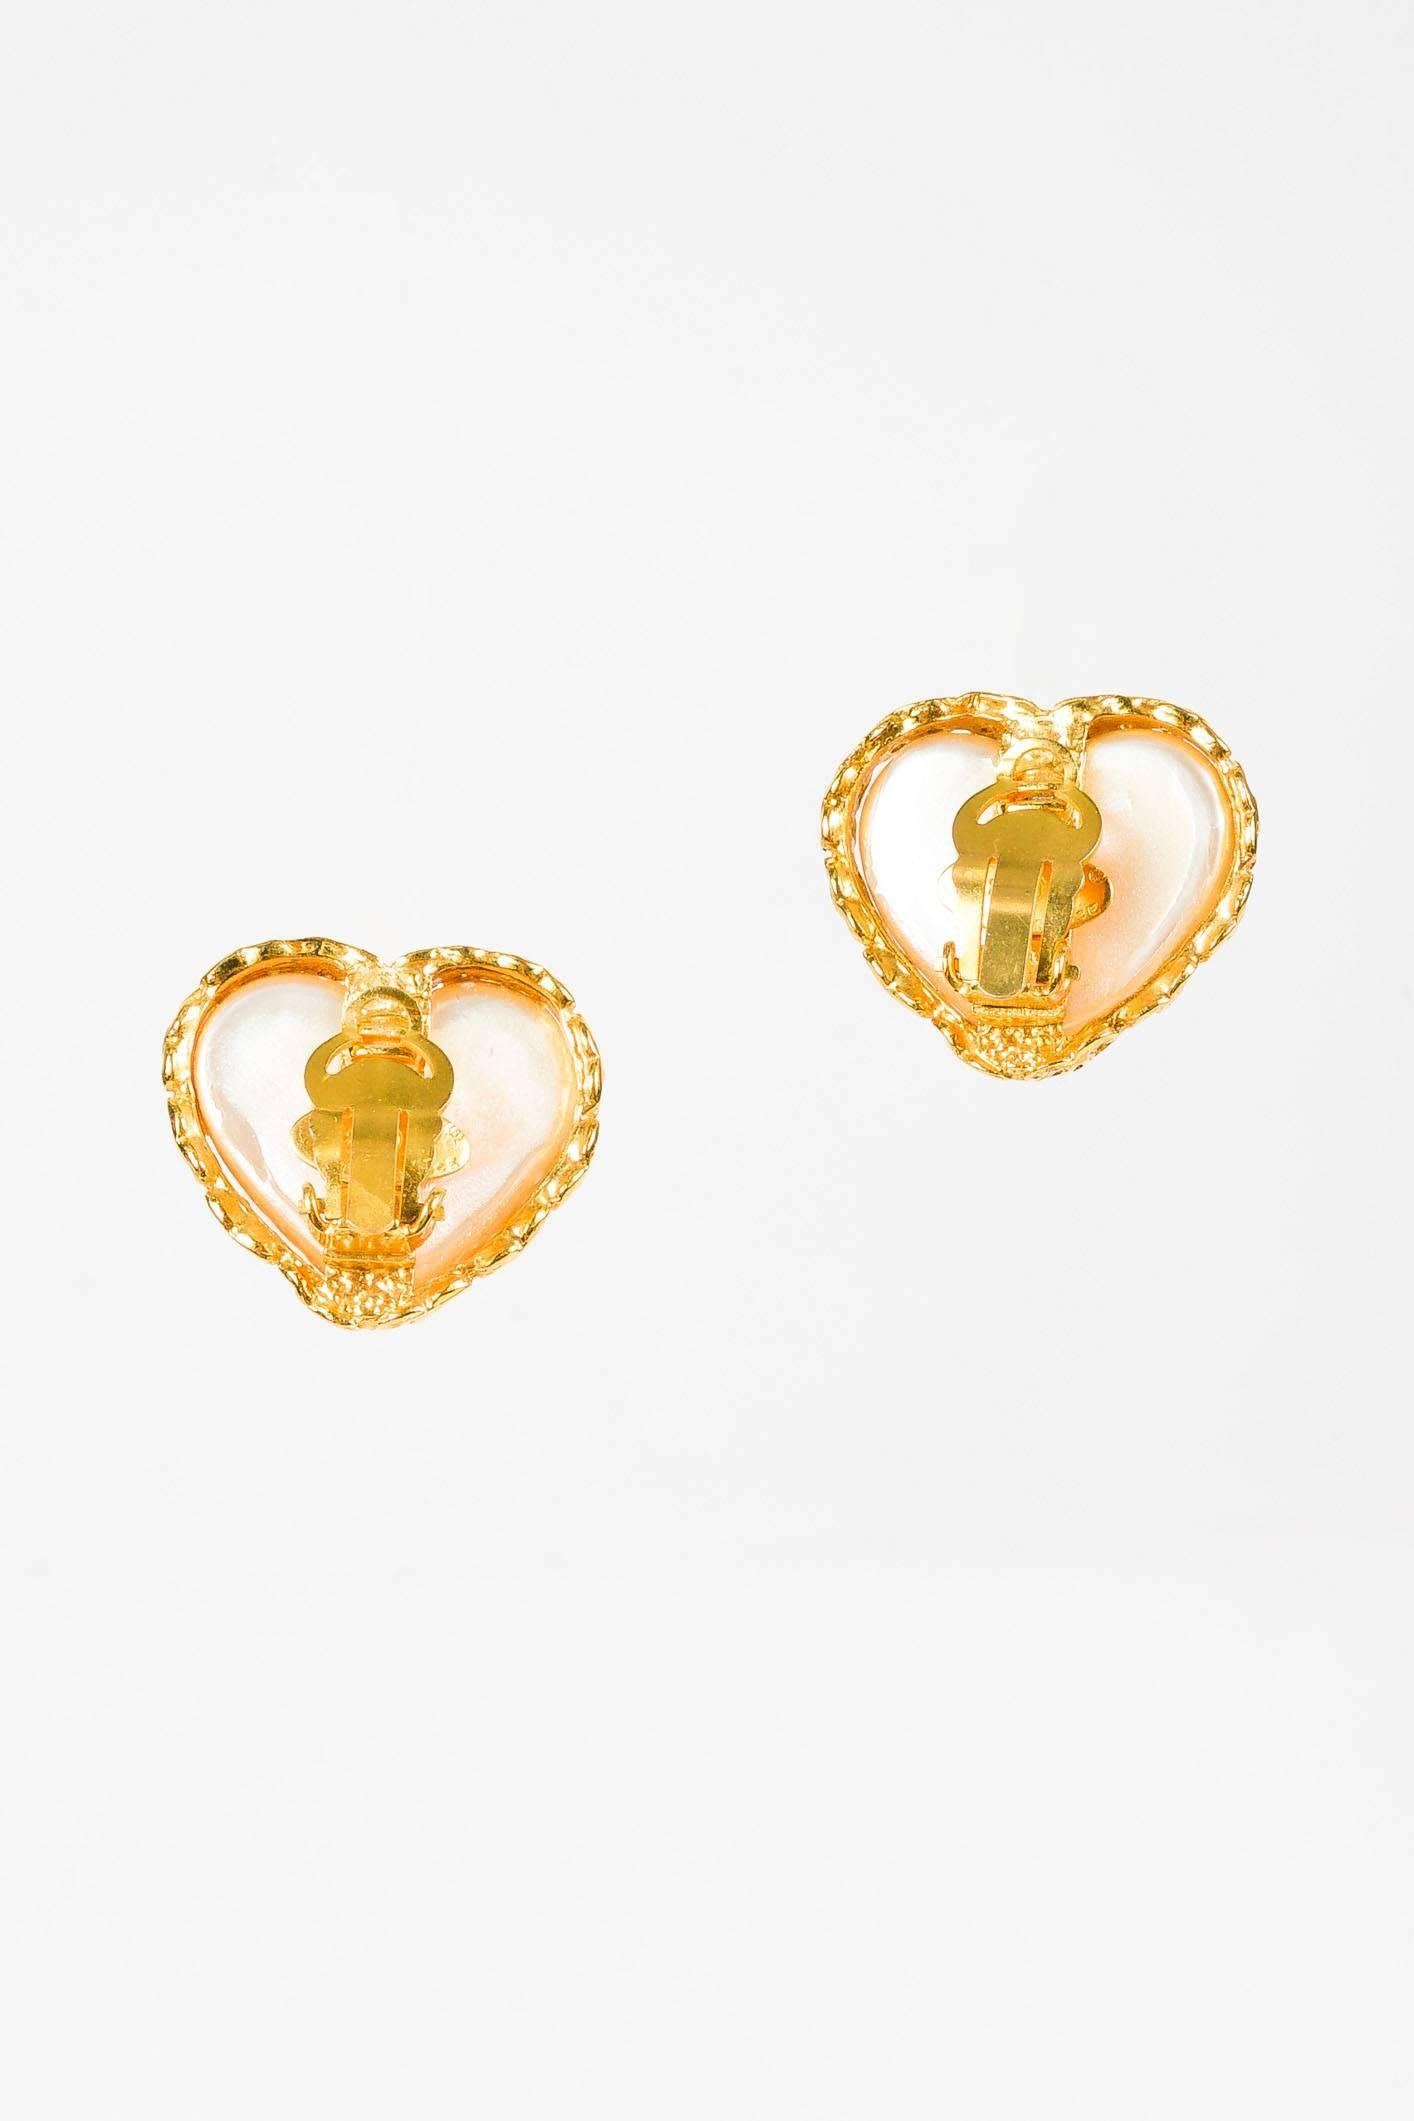 Released circa 1991 From season 28.  Faux pearl heart clip-on earring featuring a gold-tone metal 'CC' trim.

Additional measurements: Total Height approx. 1"

Condition details: Pre-owned. This item is in good condition. Chipped coating